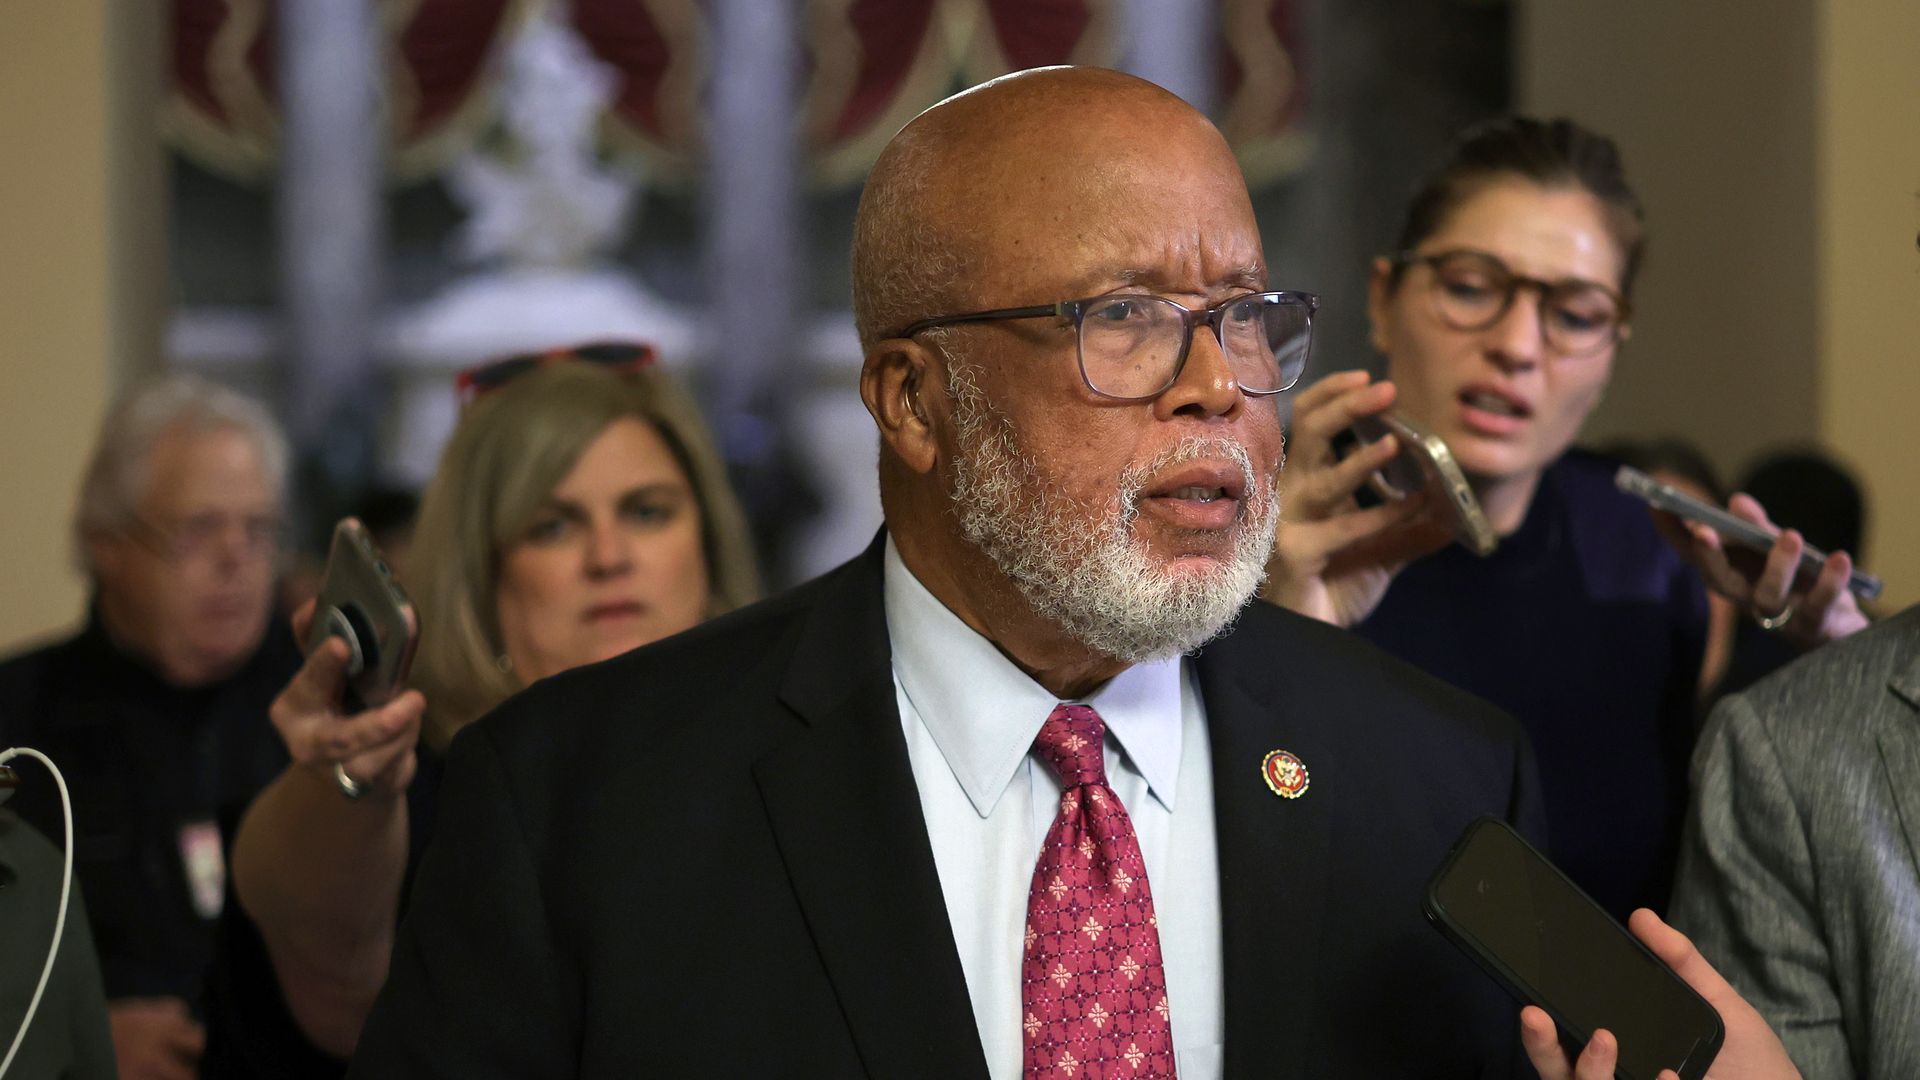 Rep. Bennie Thompson, wearing a white shirt, red tie and dark gray suit, speaks to reporters outside Speaker Nancy Pelosi's office at the Capitol.